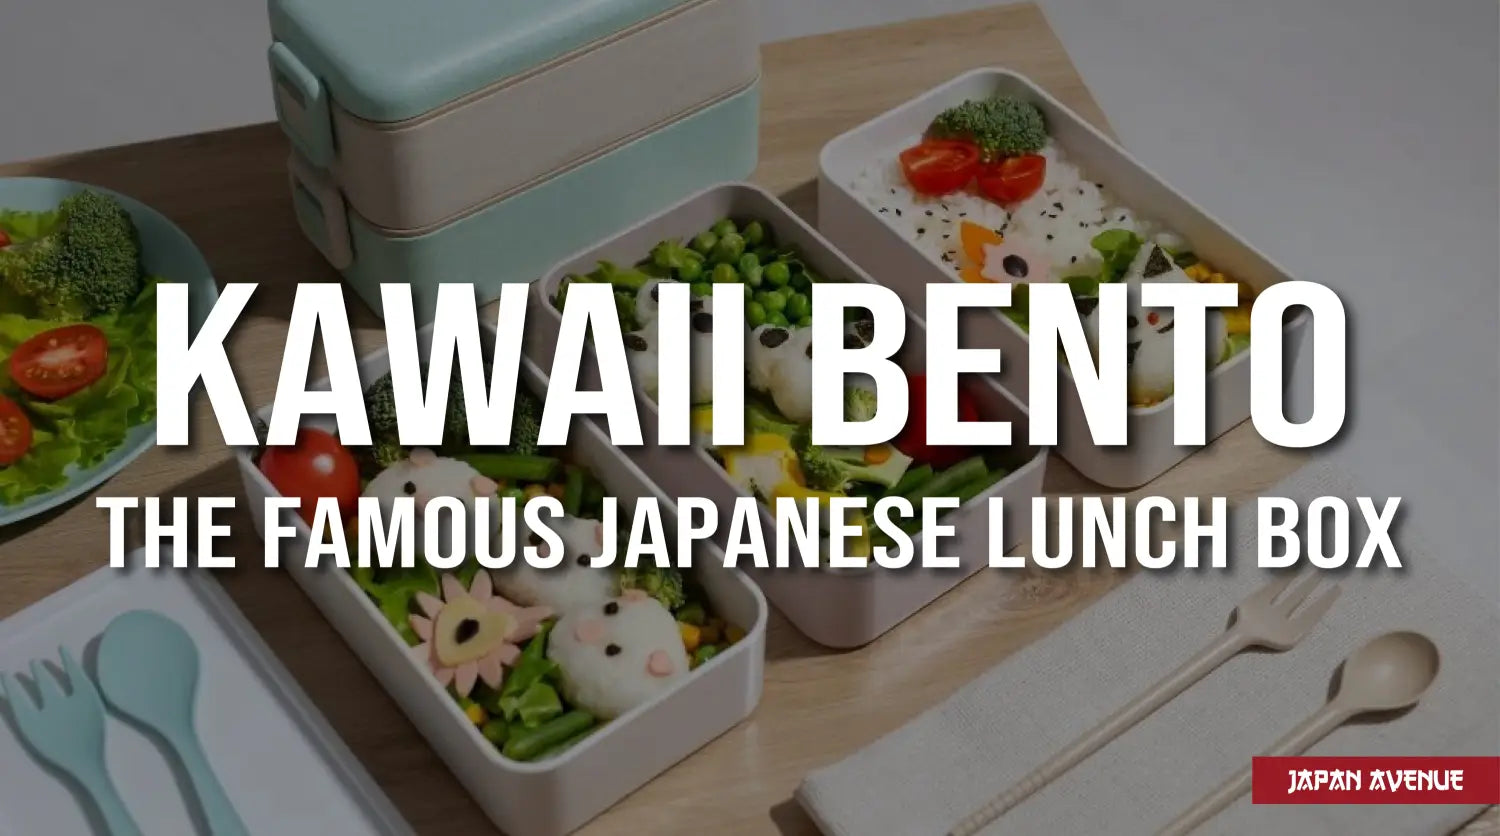 Lunch box Gift Ideas for men - Gift Ideas for women - Offer a bento box